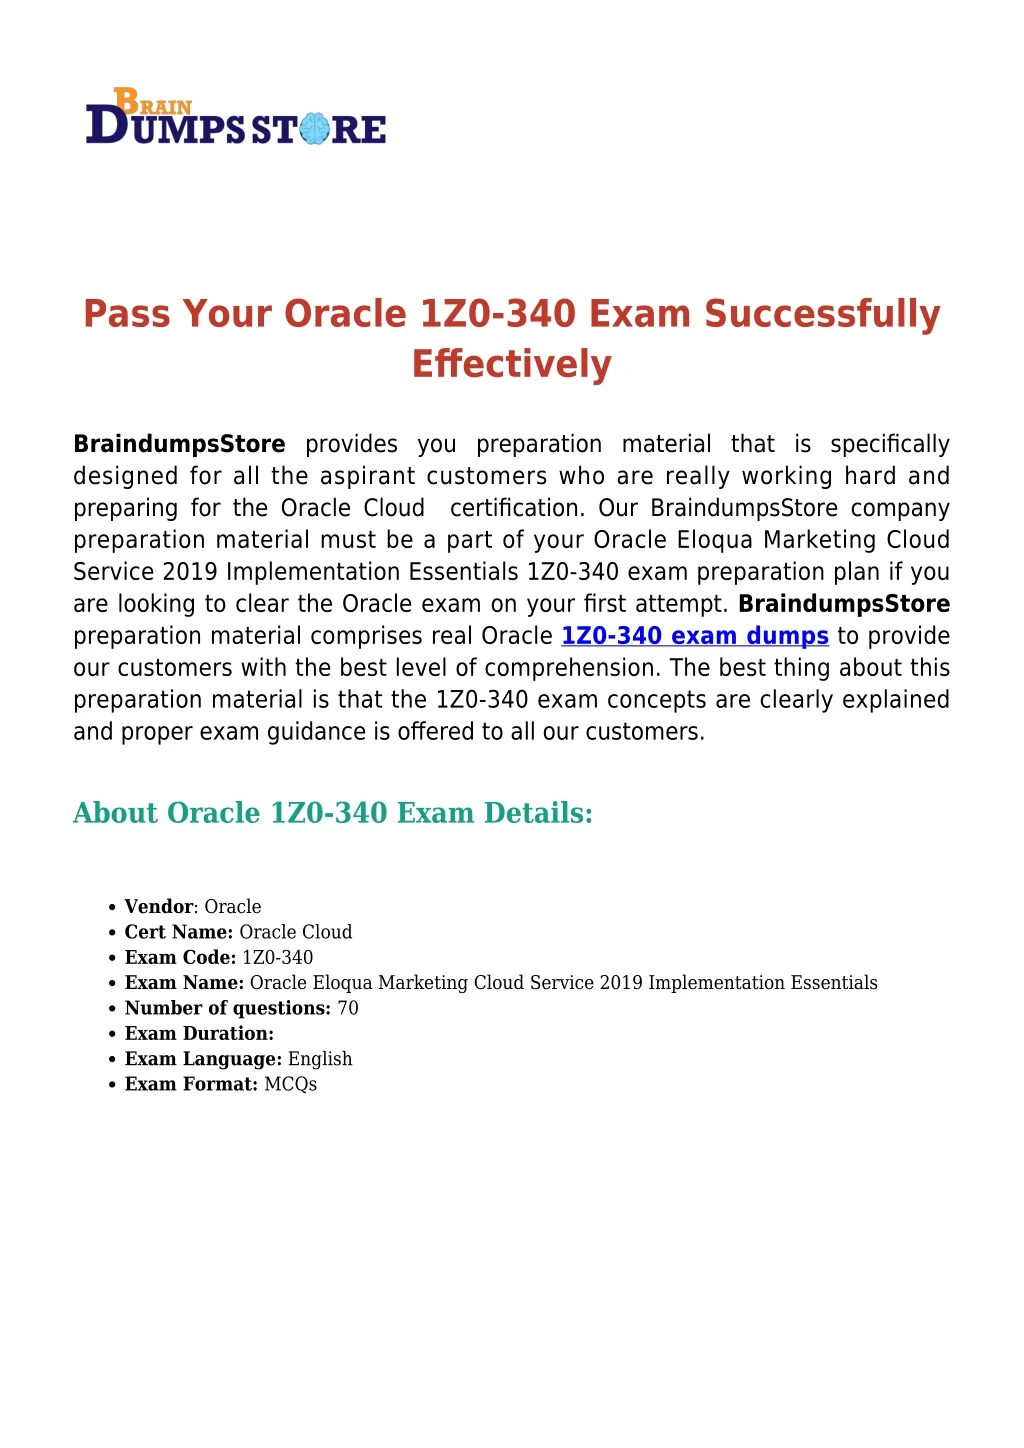 pass your oracle 1z0 340 exam successfully